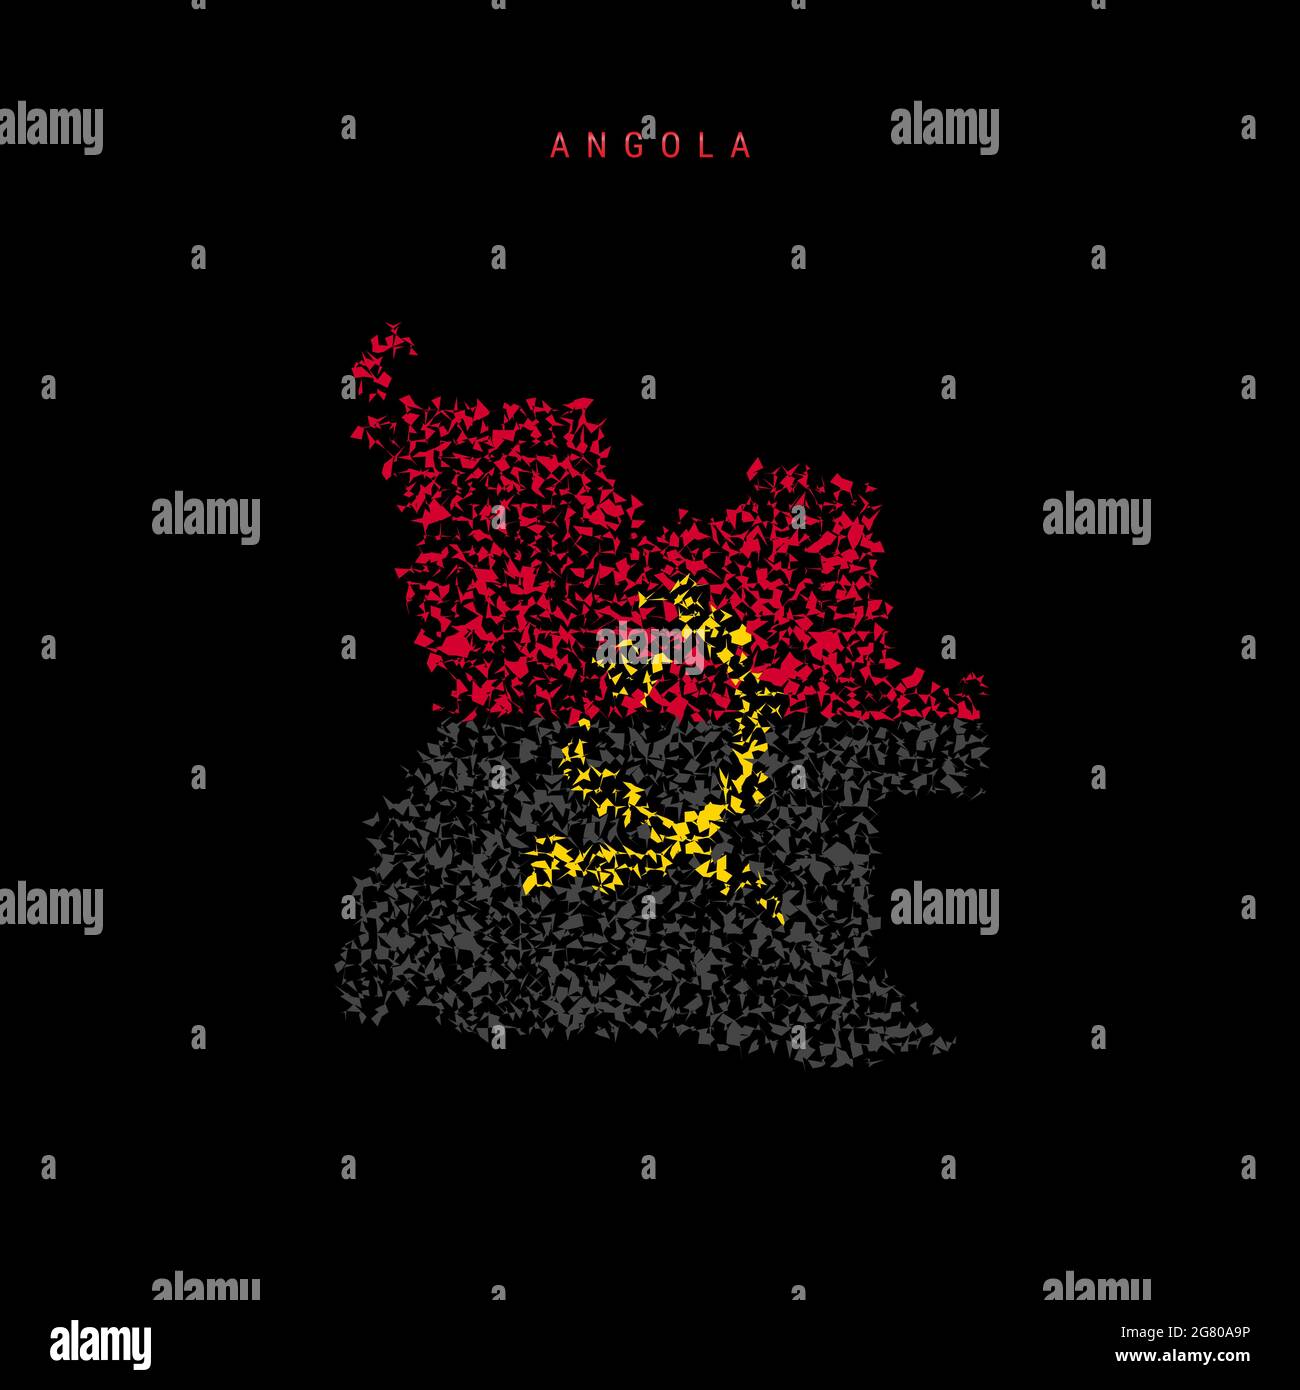 Angola flag map, chaotic particles pattern in the colors of the Angolan flag. illustration isolated on black background. Stock Photo